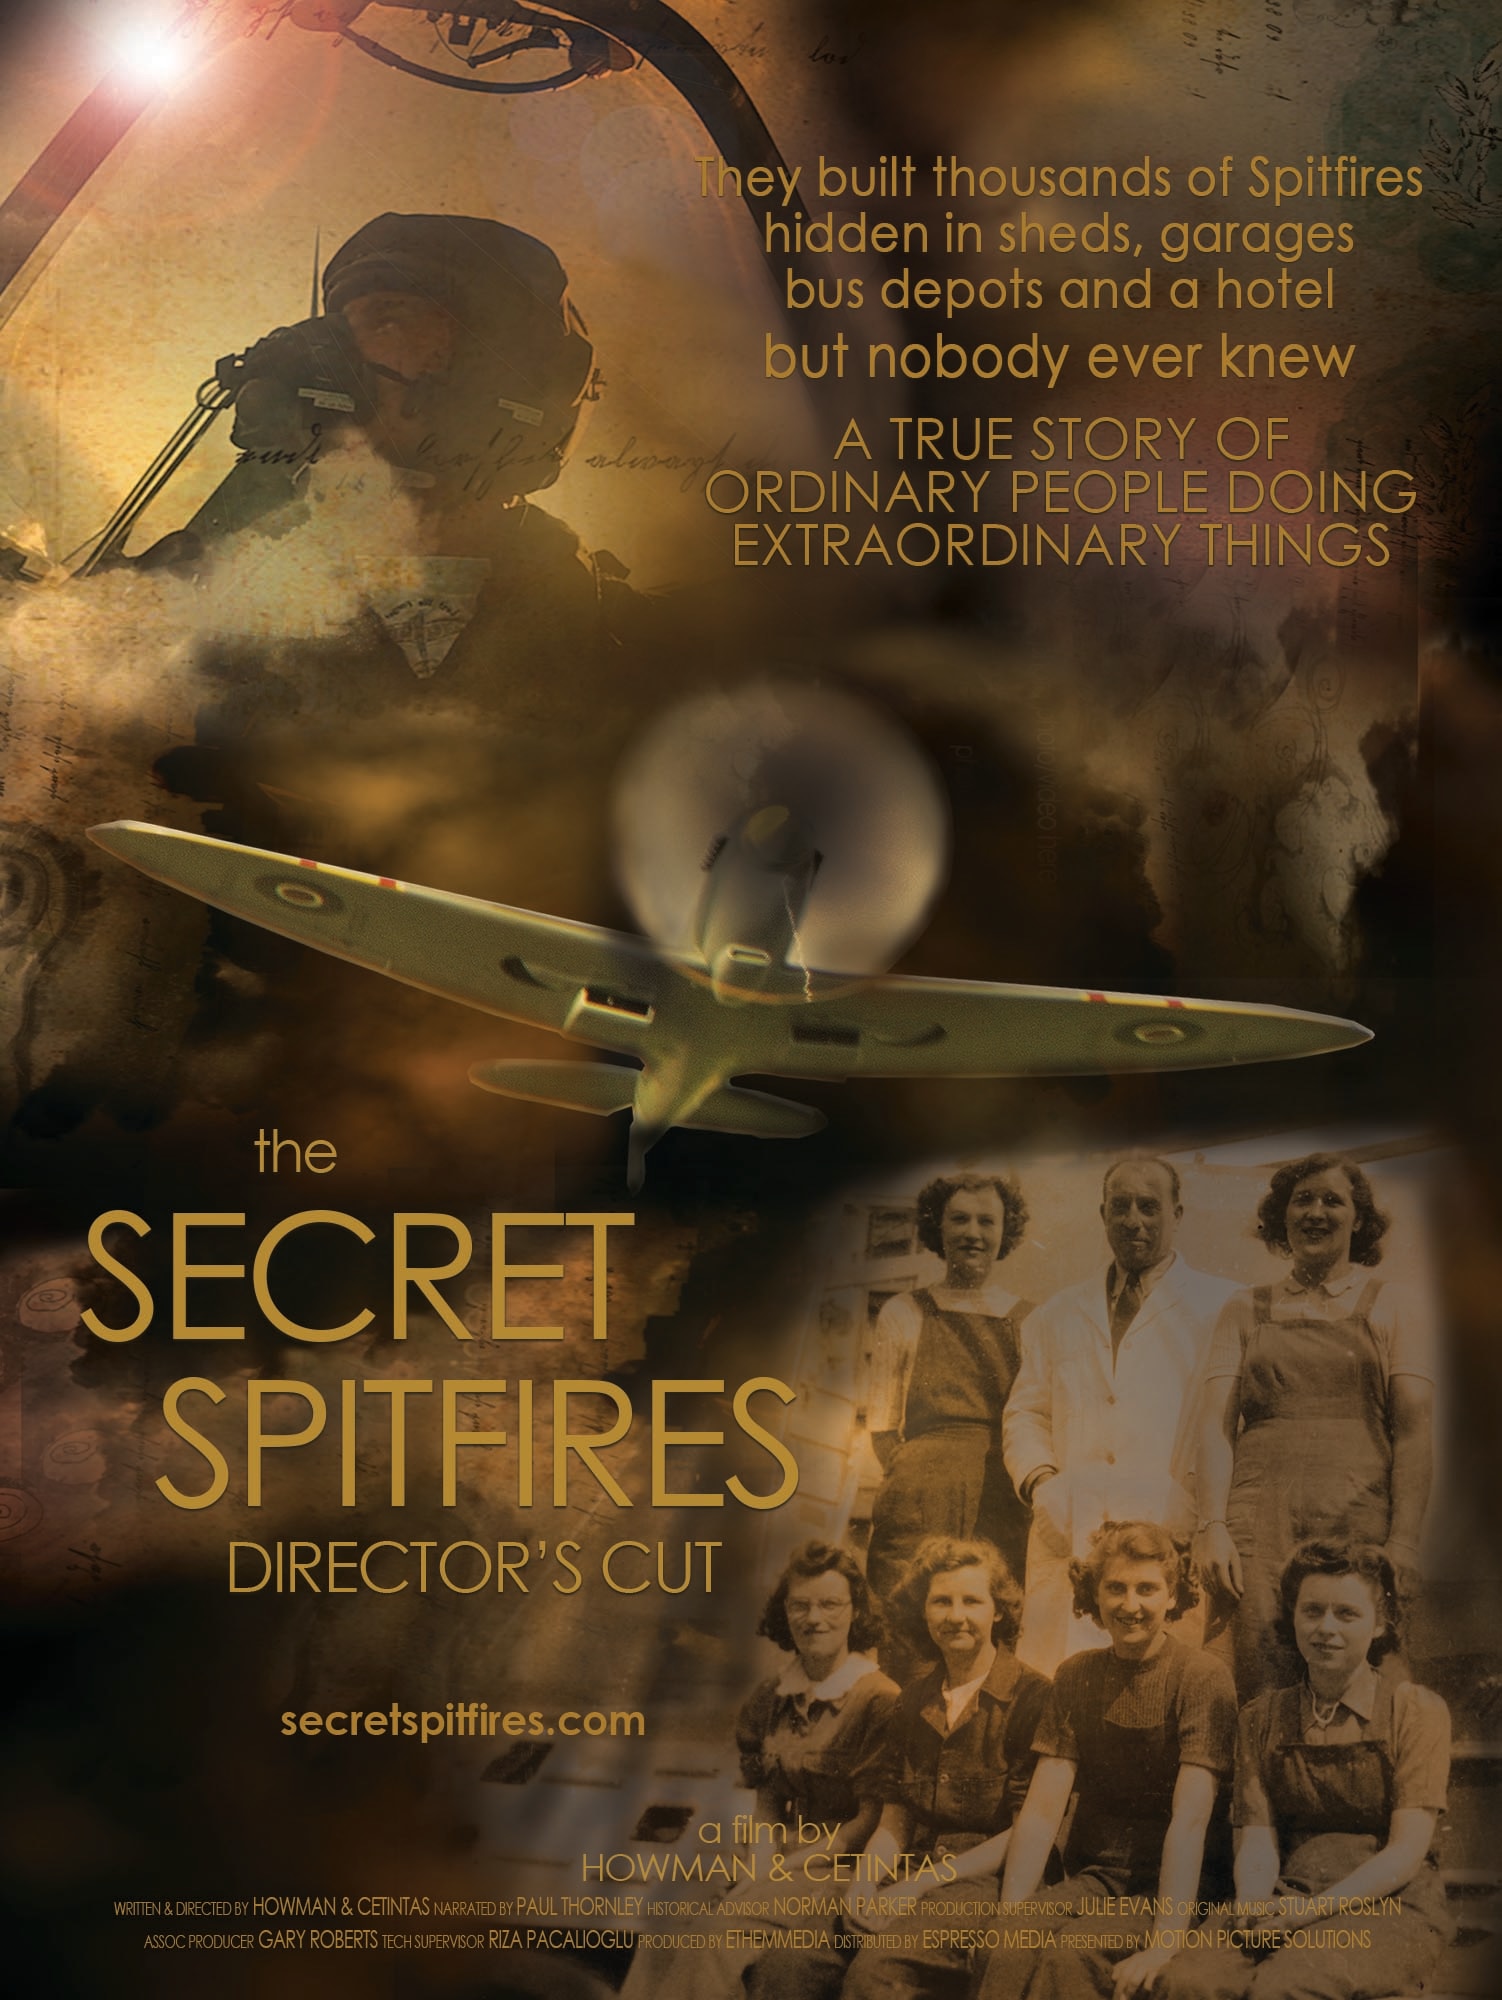 The U.S. premiere of the film “Secret Spitfire” will occur as part of a Living History Presentation in the Air Force Museum Theatre on Monday, May 13, 2019.